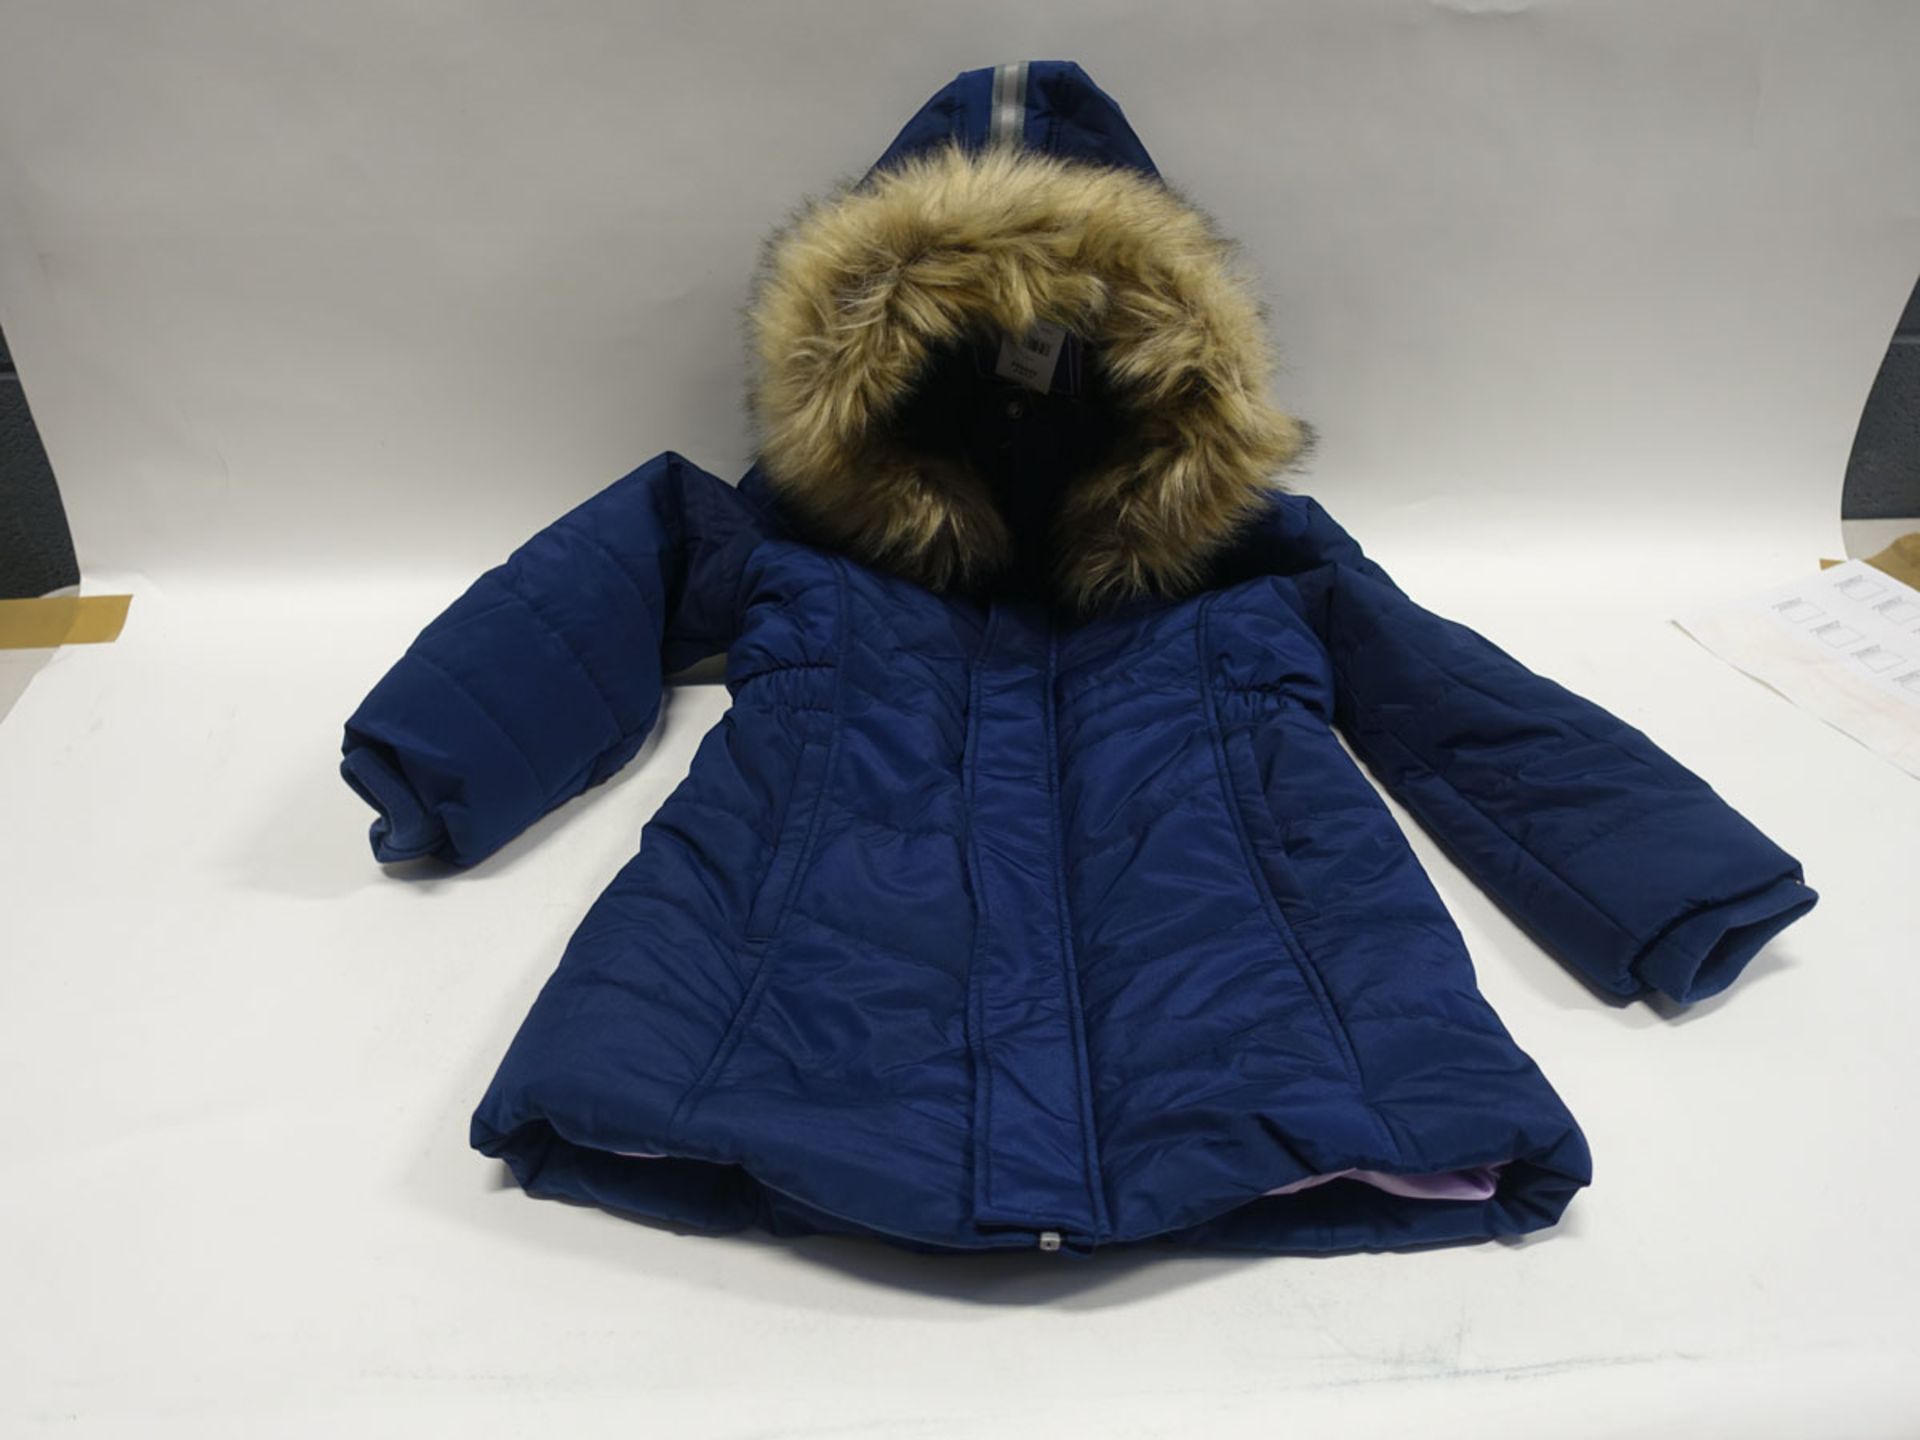 Childs navy winter's coat with faux fur trim to the hood size XL/11-12 year old